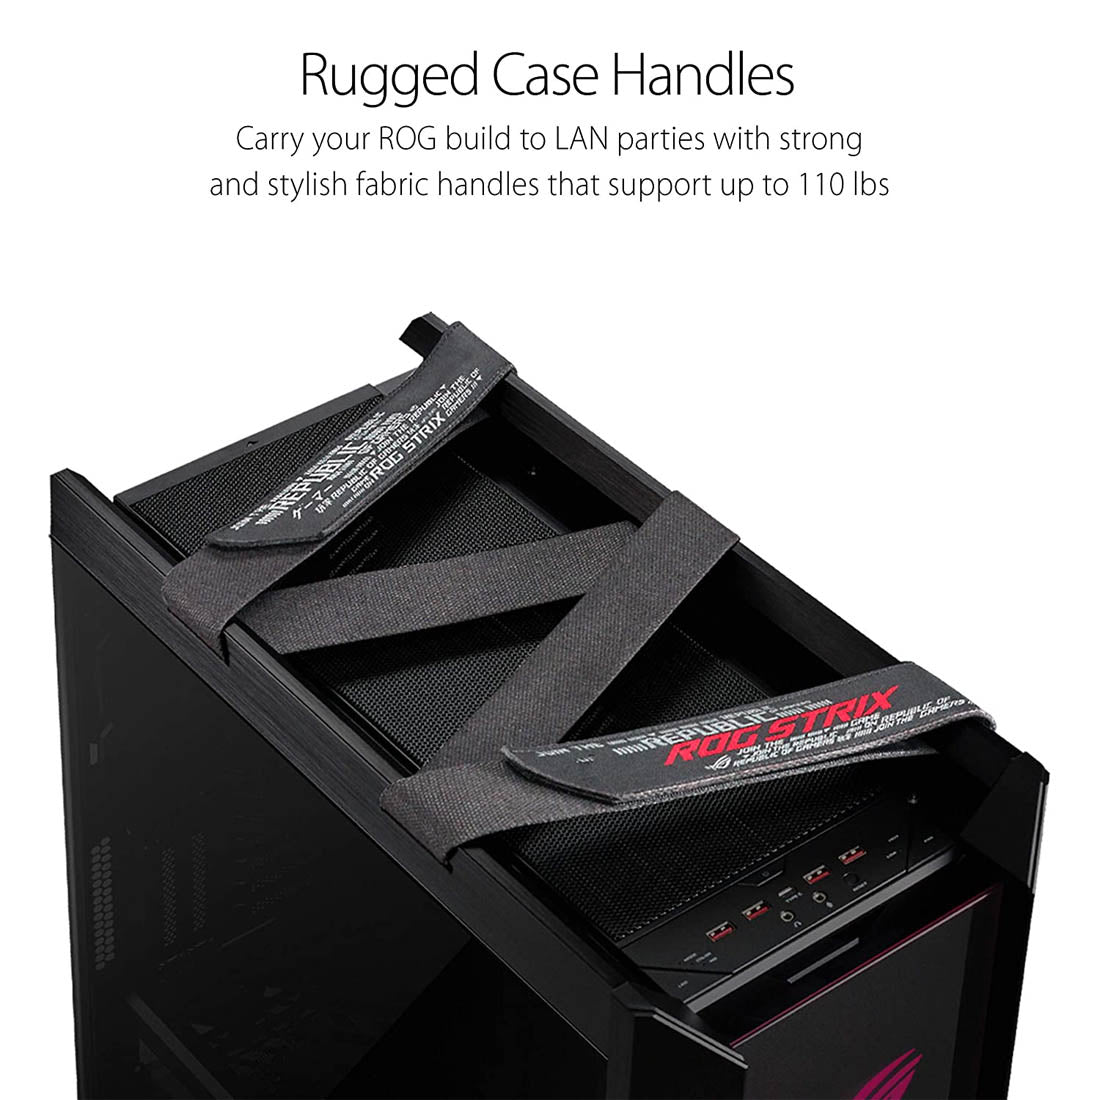 ASUS ROG STRIX HELIOS RGB CABINET From TPSTECH.inASUS ROG STRIX HELIOS RGB CABINET From TPSTECH.in